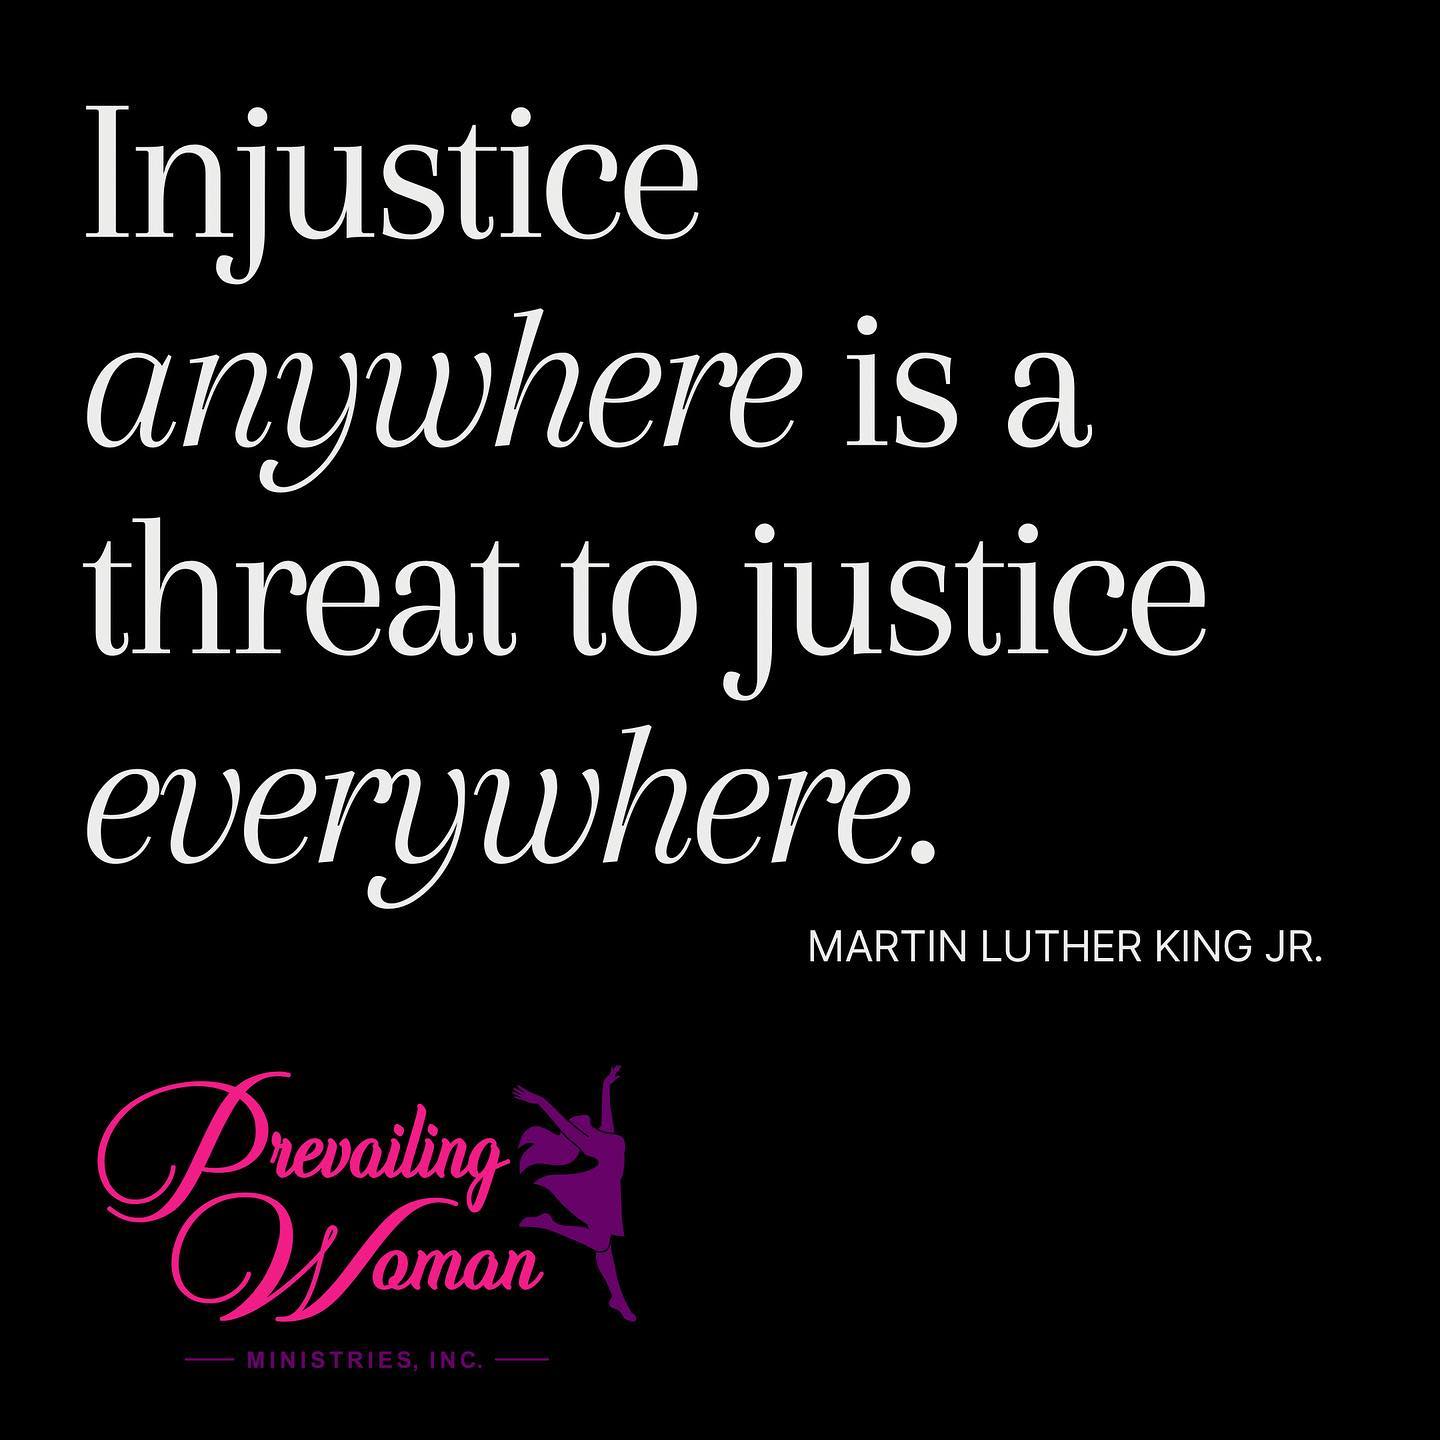 We remember and celebrate the legacy of Dr. Martin Luther King Jr. #prevailingwomanministries #mlkday